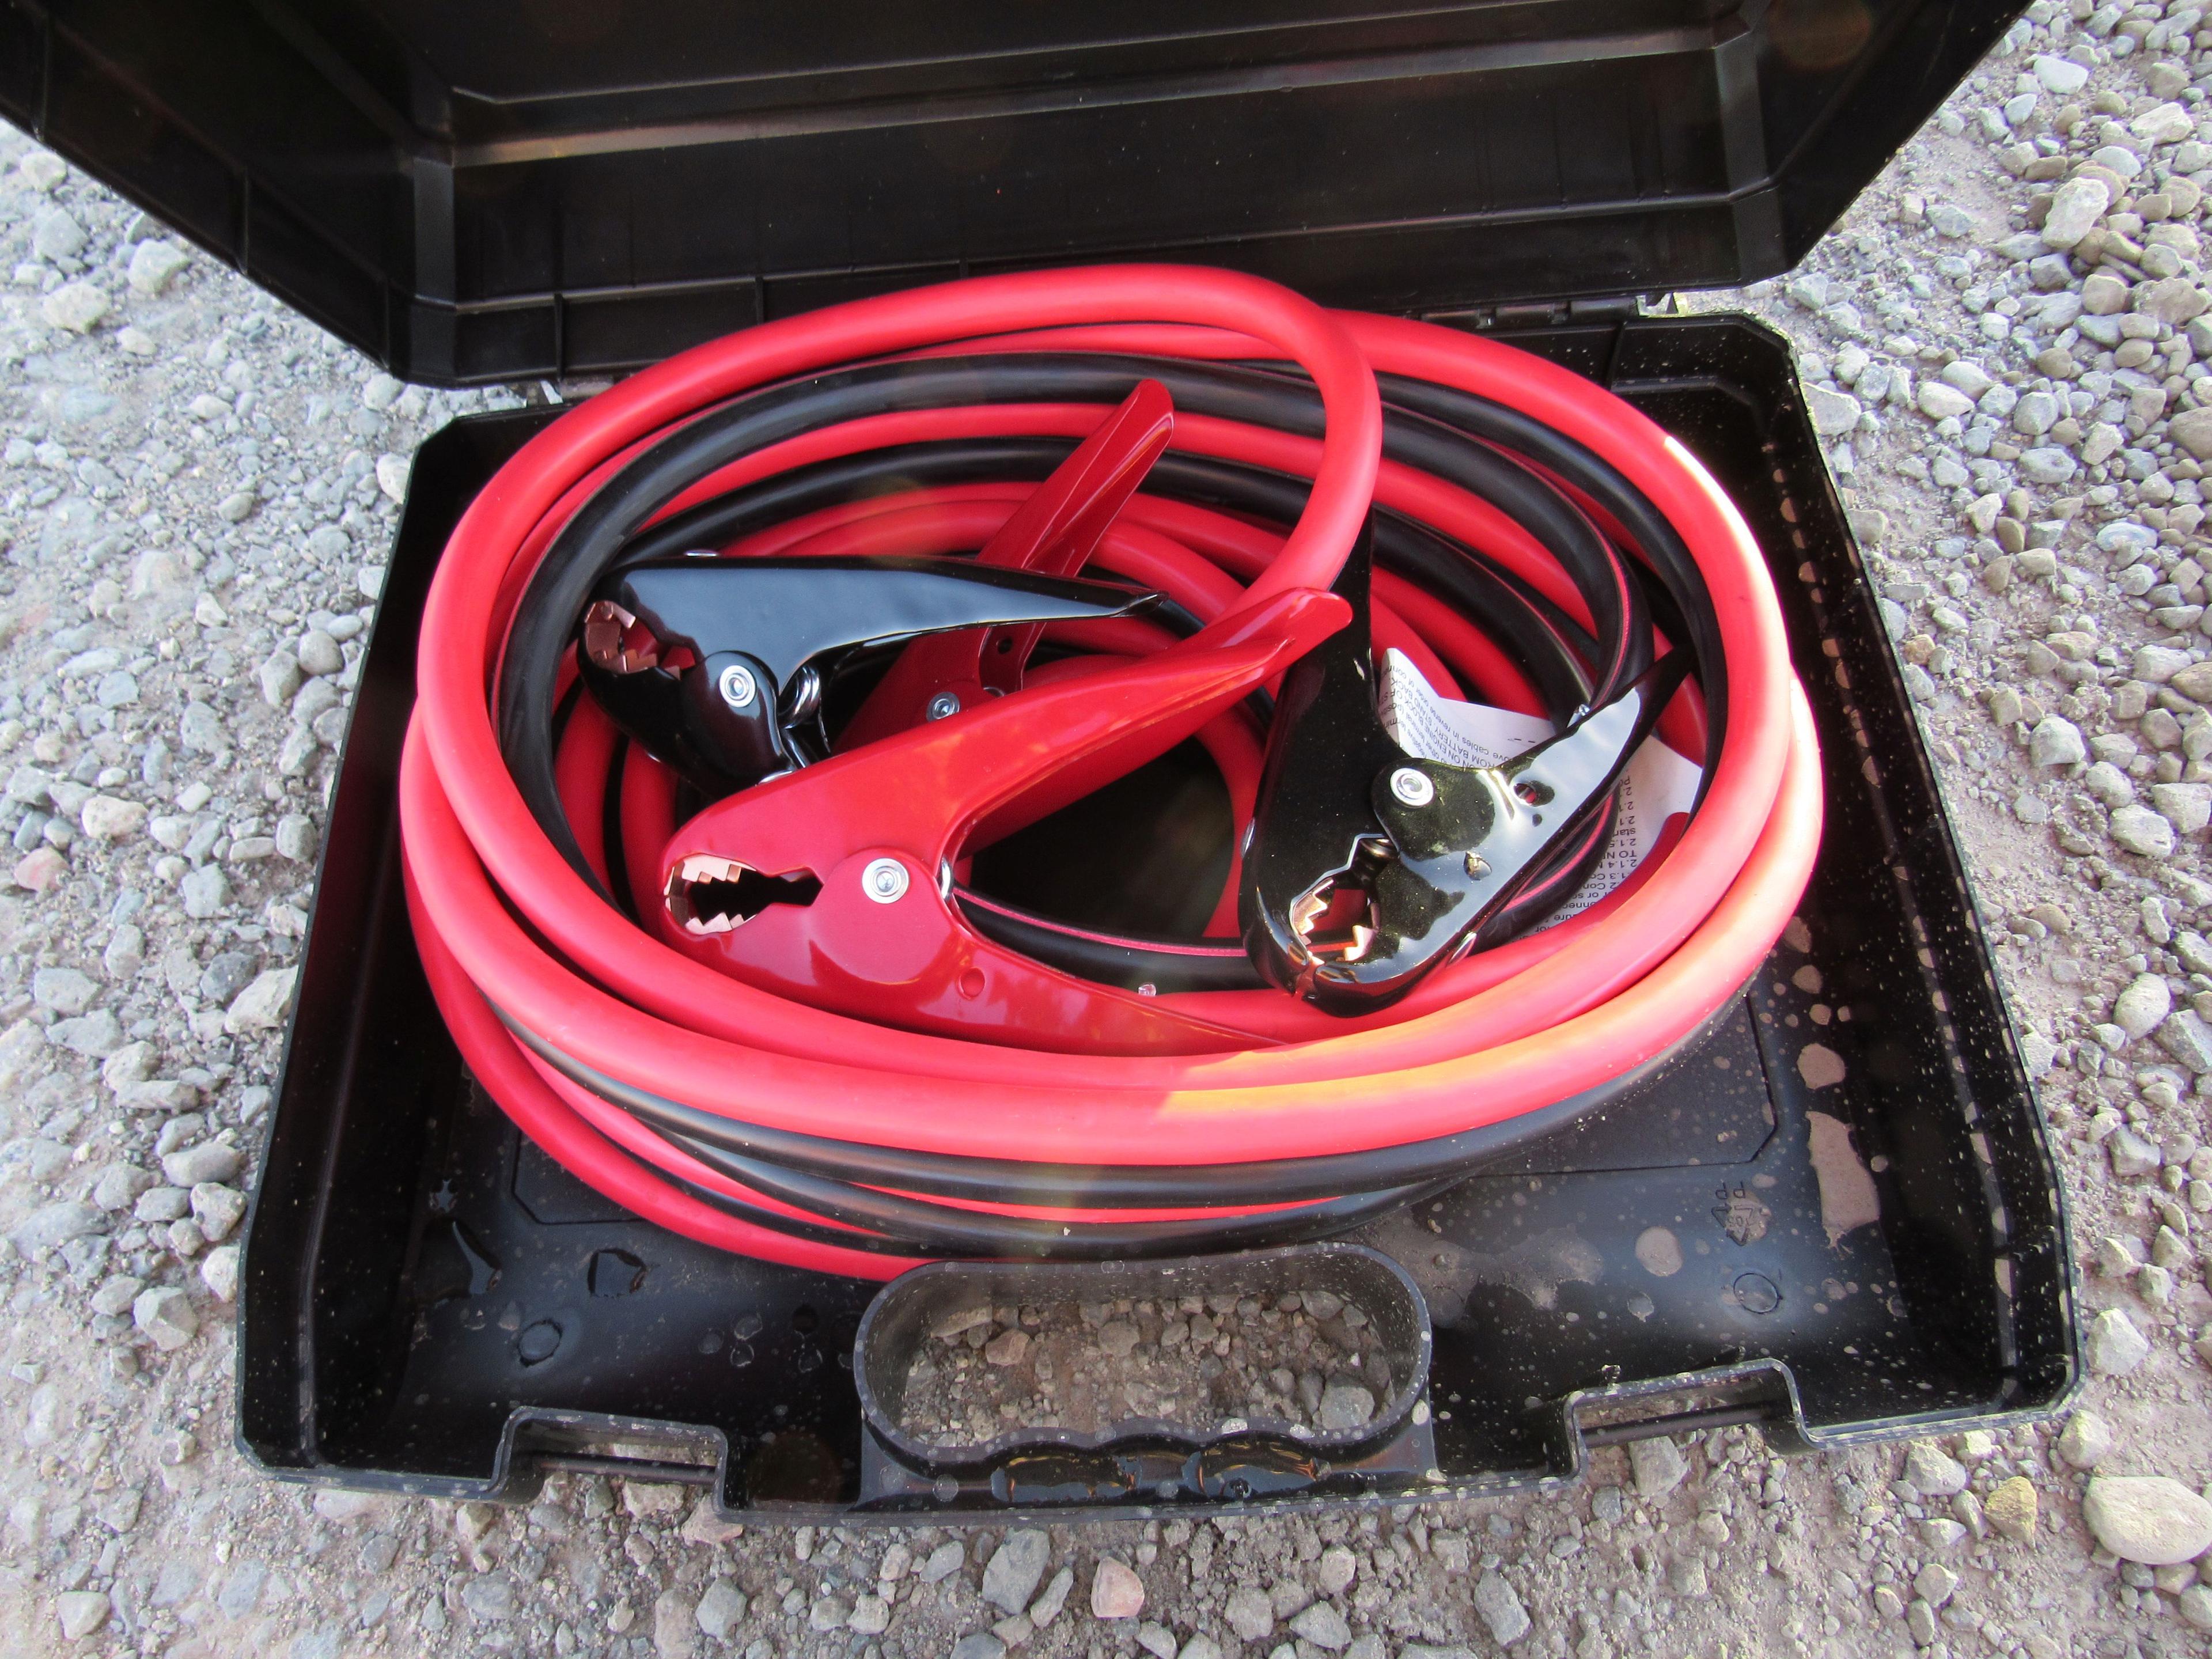 NEW & UNUSED 800 AMP JUMPER CABLES